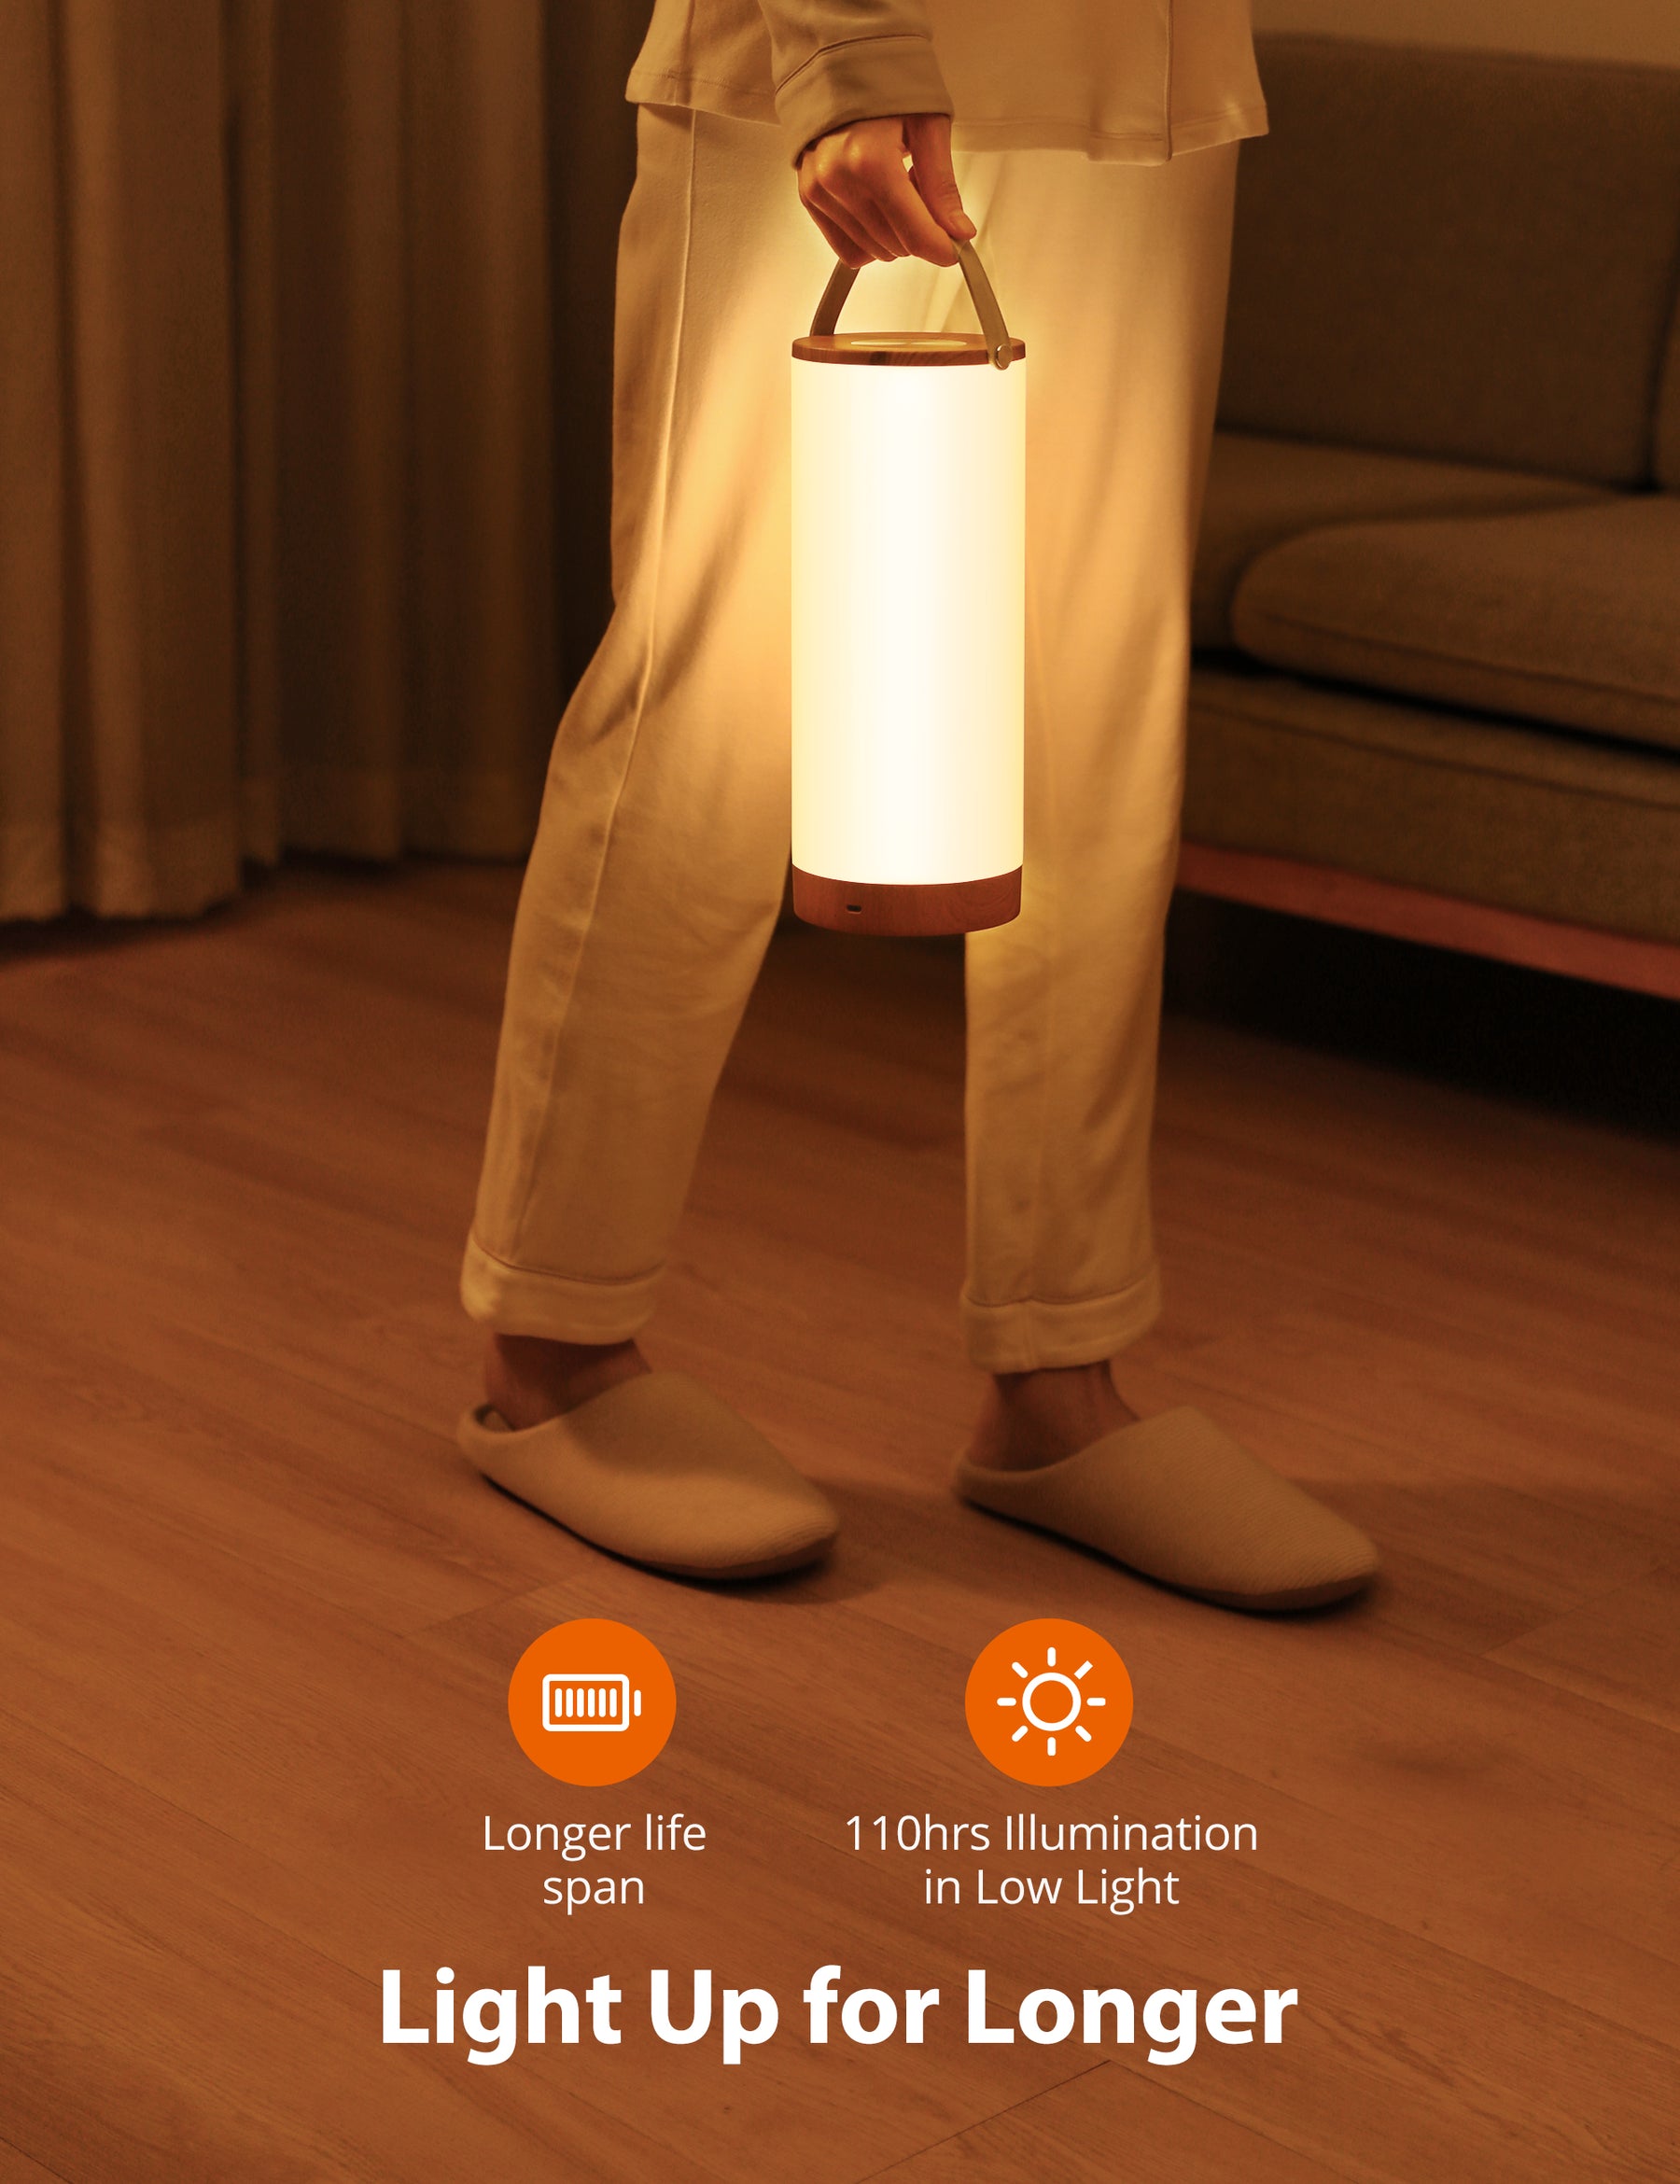 LED Table Lamp with Ultra-Portable Lamp with Smart Touch Sensor 4000mAh  Battery Capacity